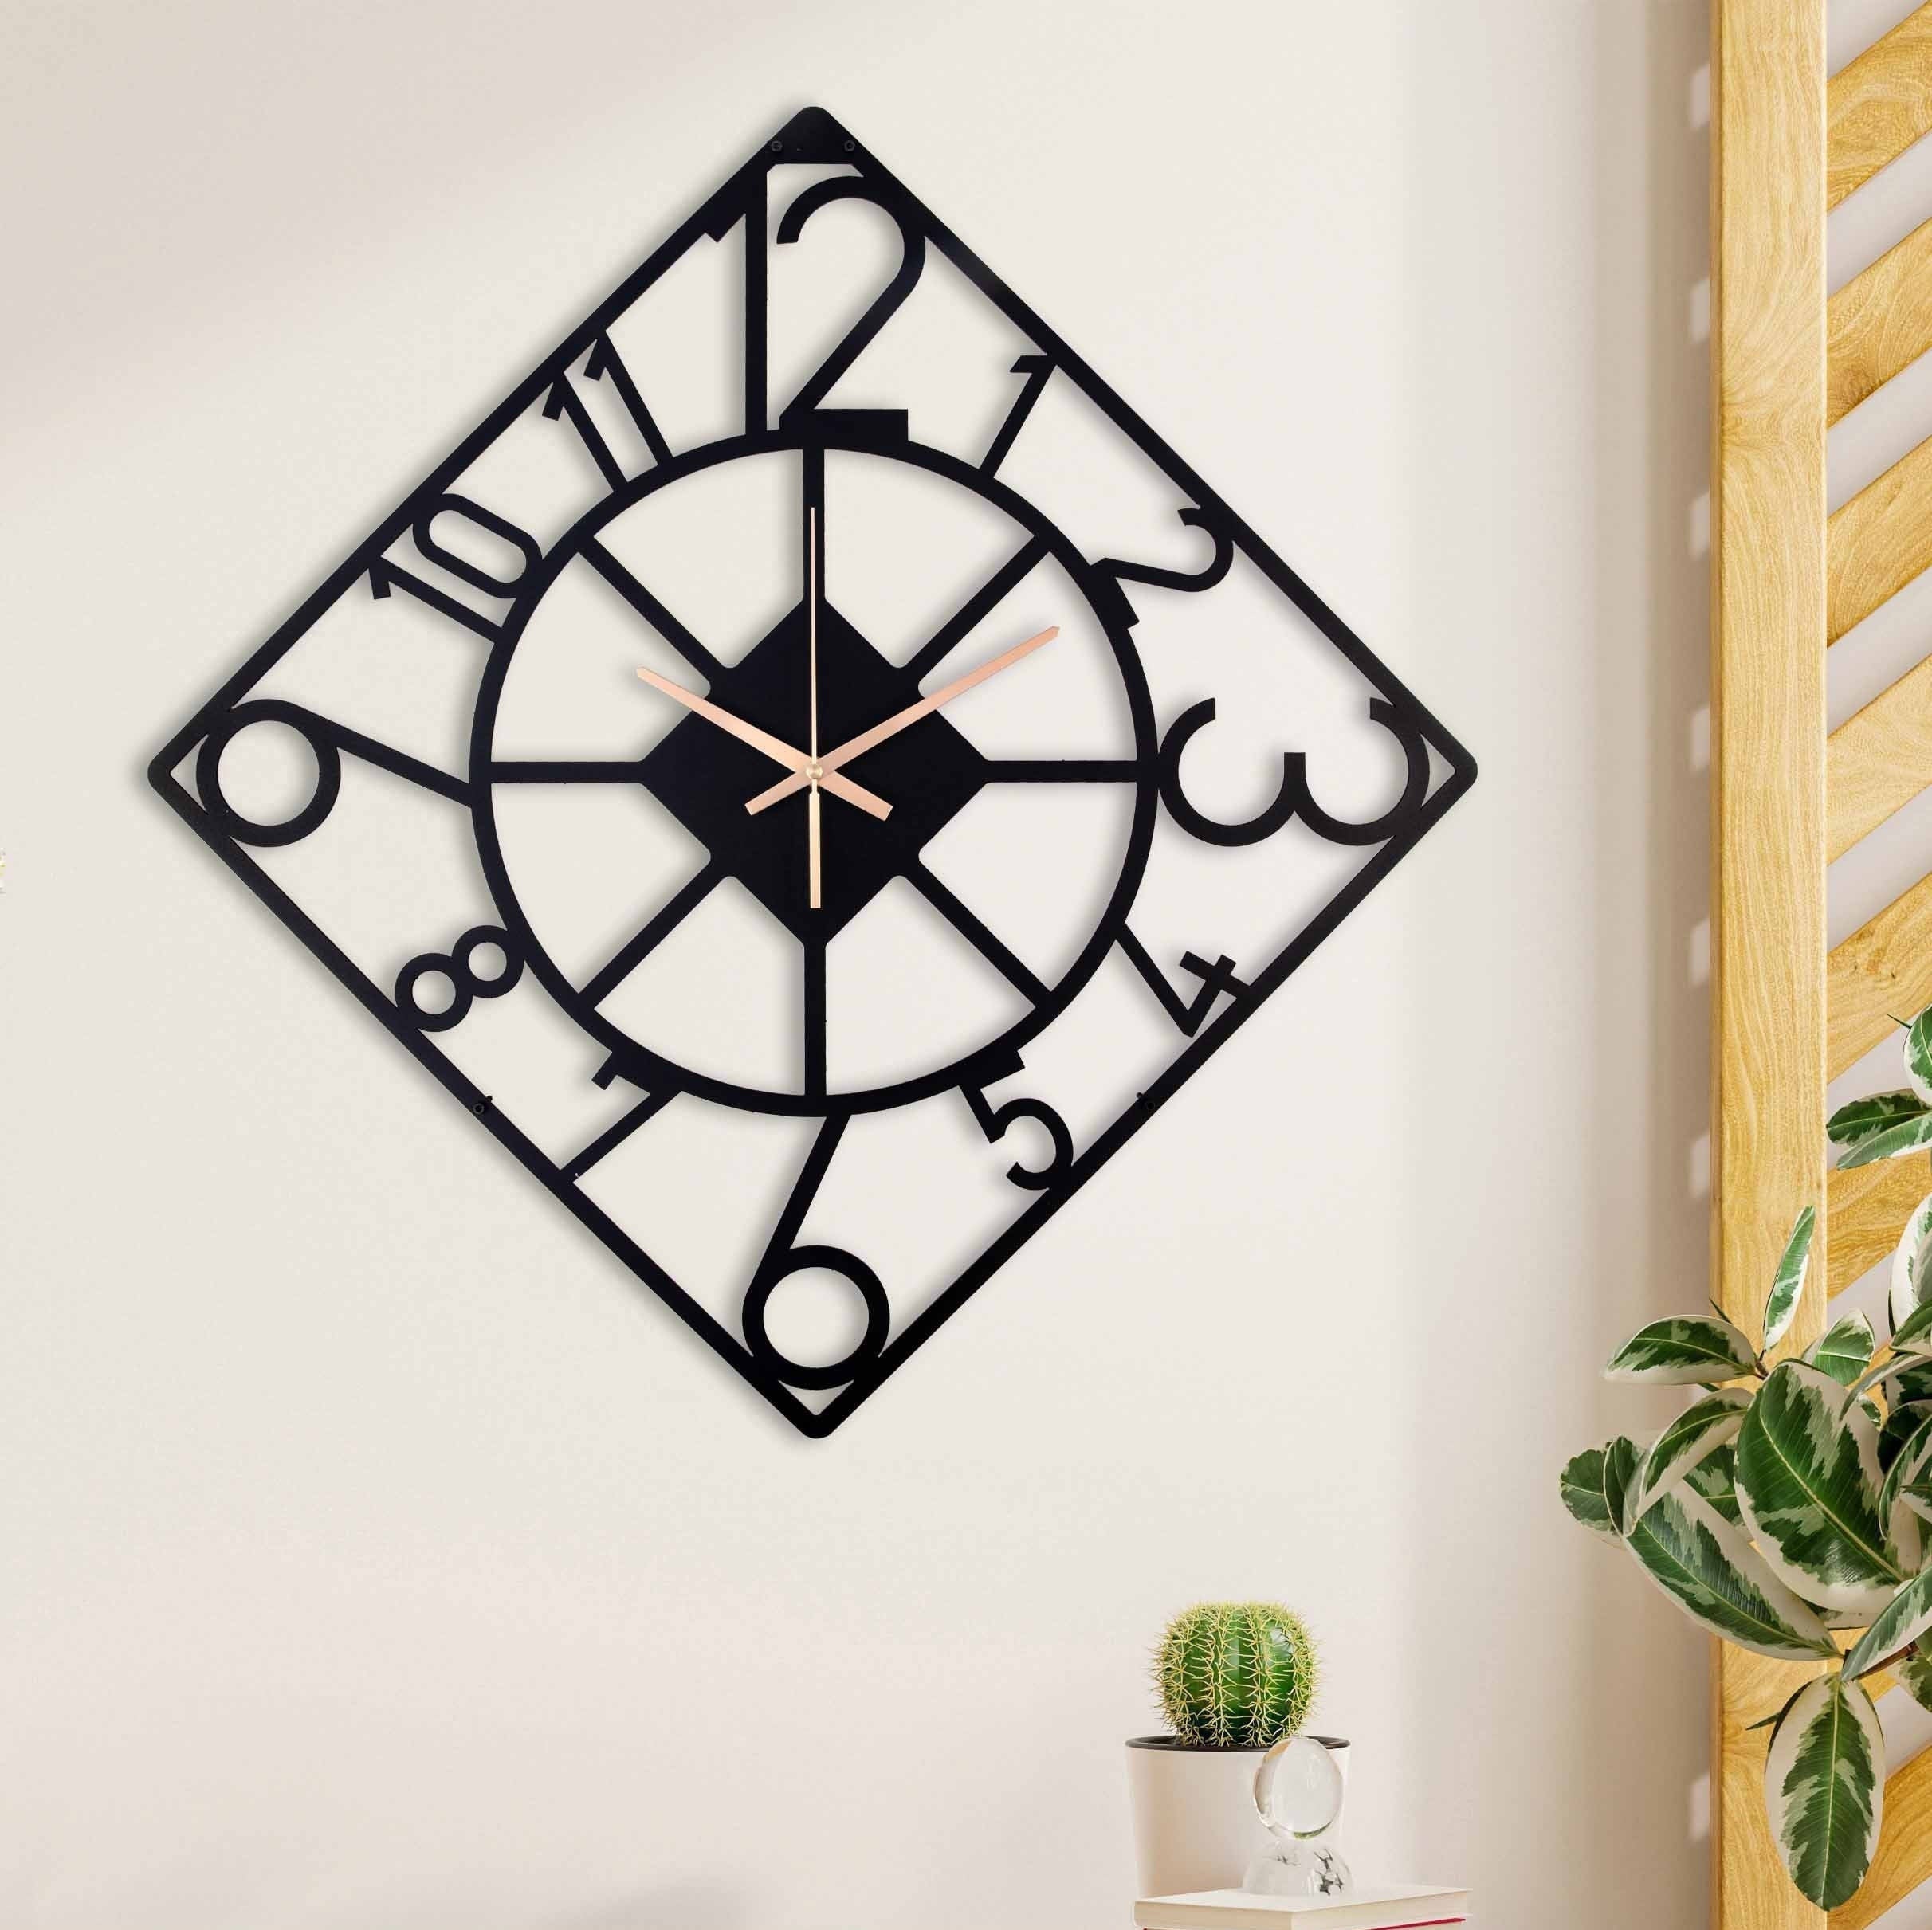 Square Wall Clock, Modern Wall Clock, Home Decor And Gifts, Unique Wall Clock, Metal Wall Clock, Outdoor Clock With Numbers, Laser Cut Clock